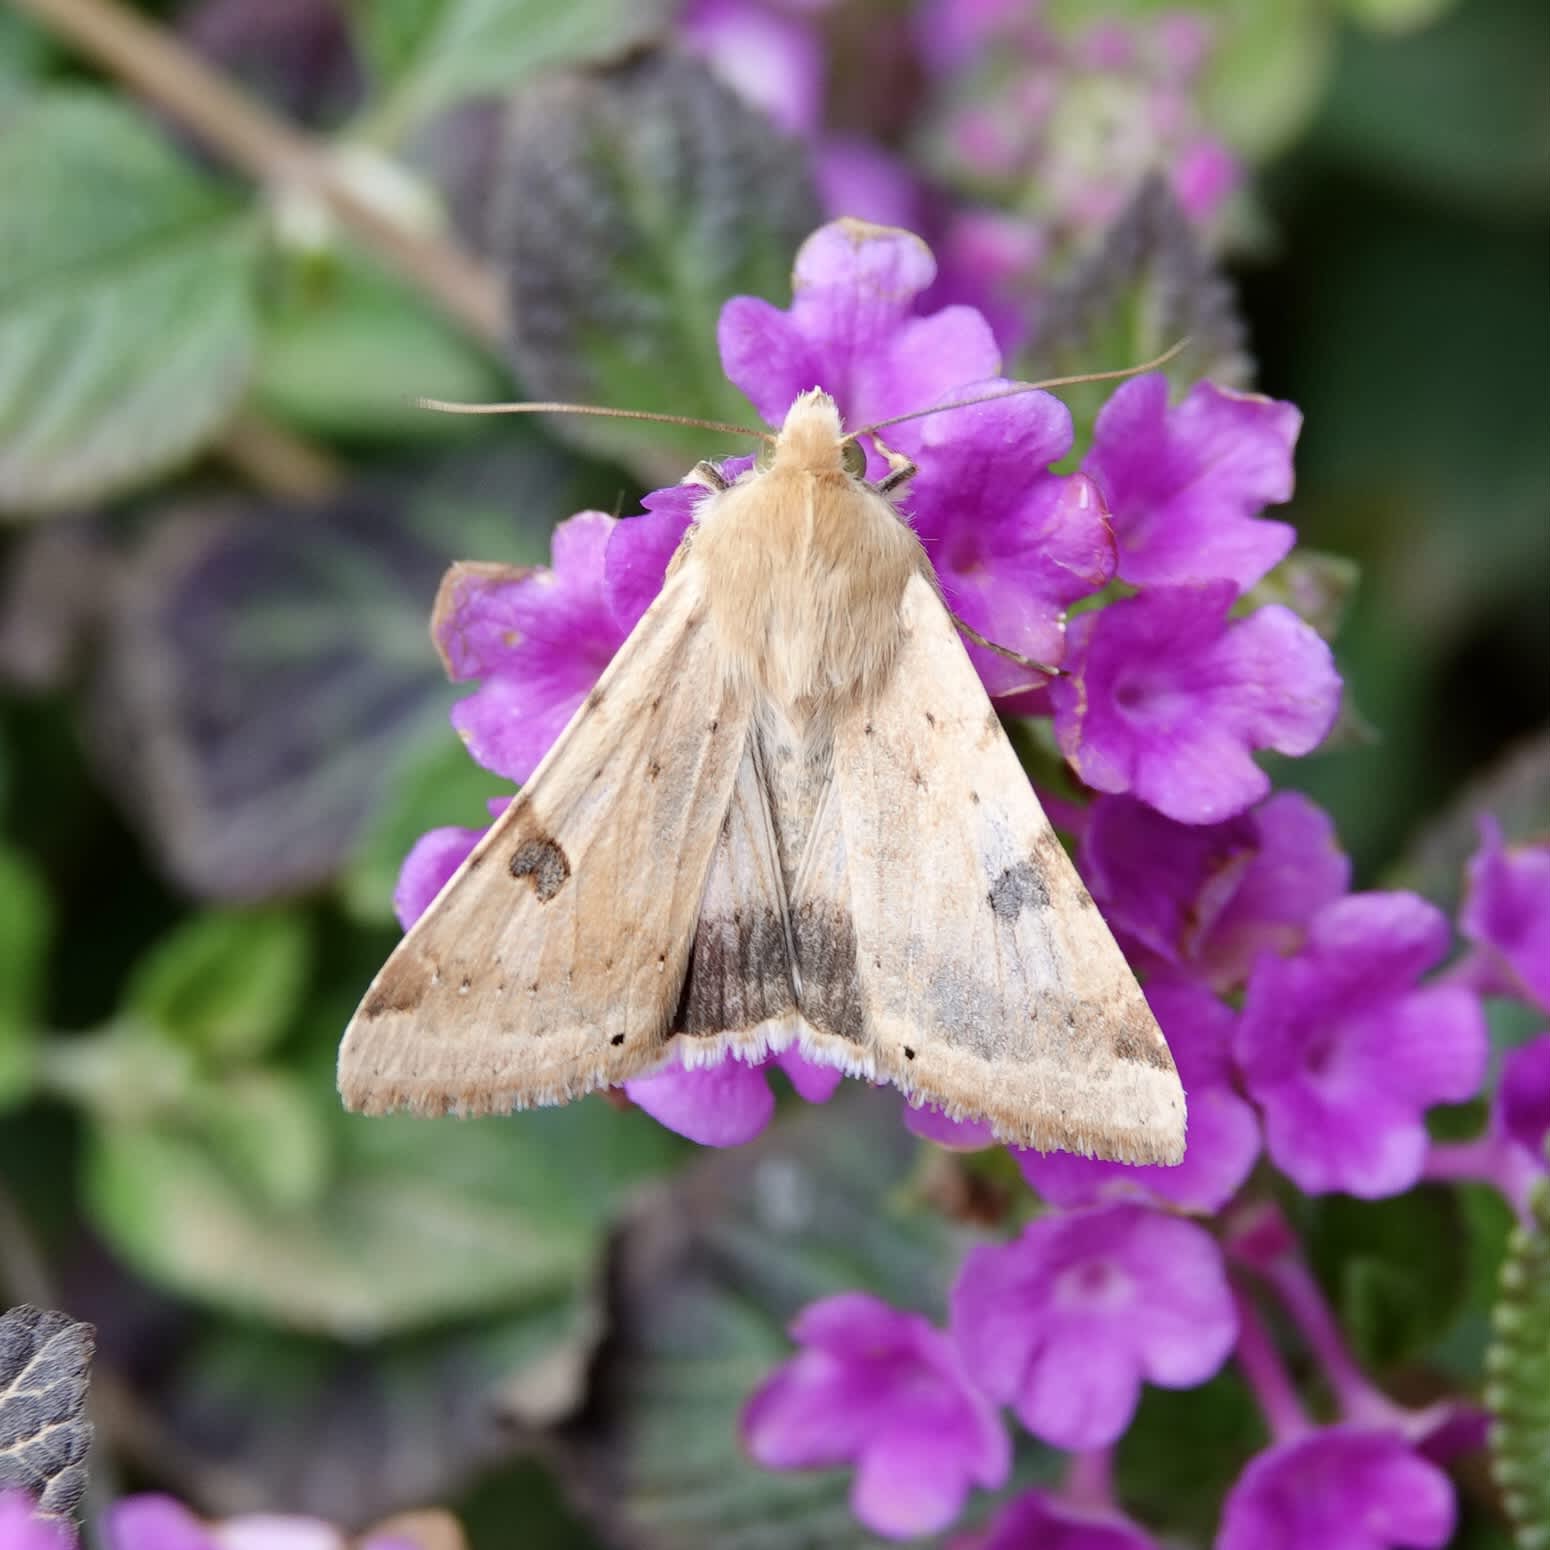 Bordered Straw (Heliothis peltigera) photographed in Somerset by Sue Davies